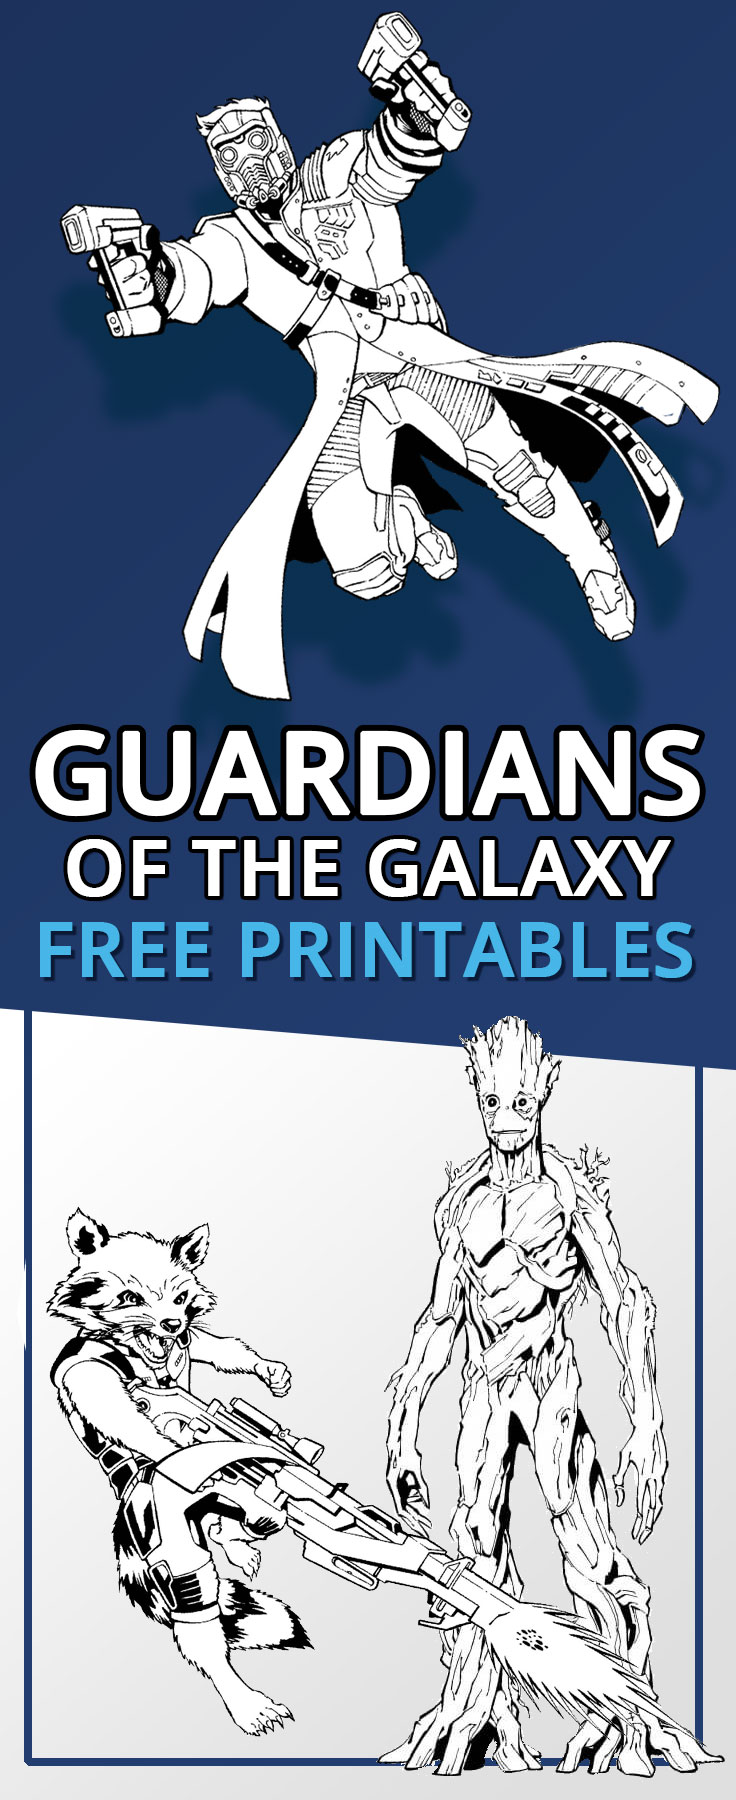 Guardians of the Galaxy FREE printables